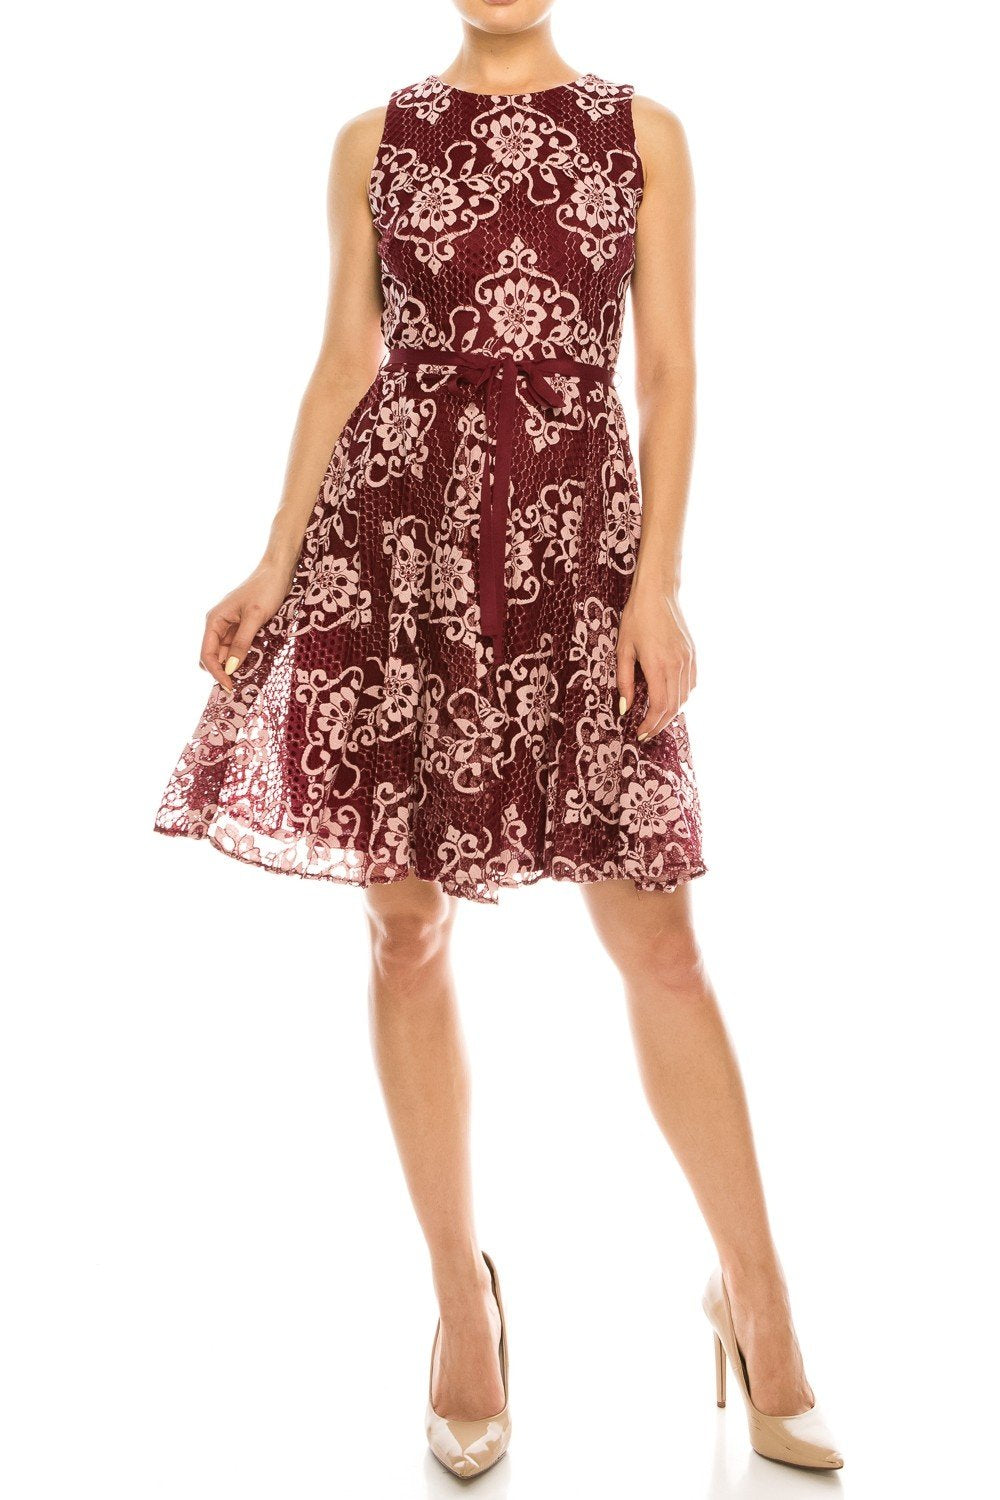 Gabby Skye - 17871M Lace Jewel A-Line Cocktail Dress In Red